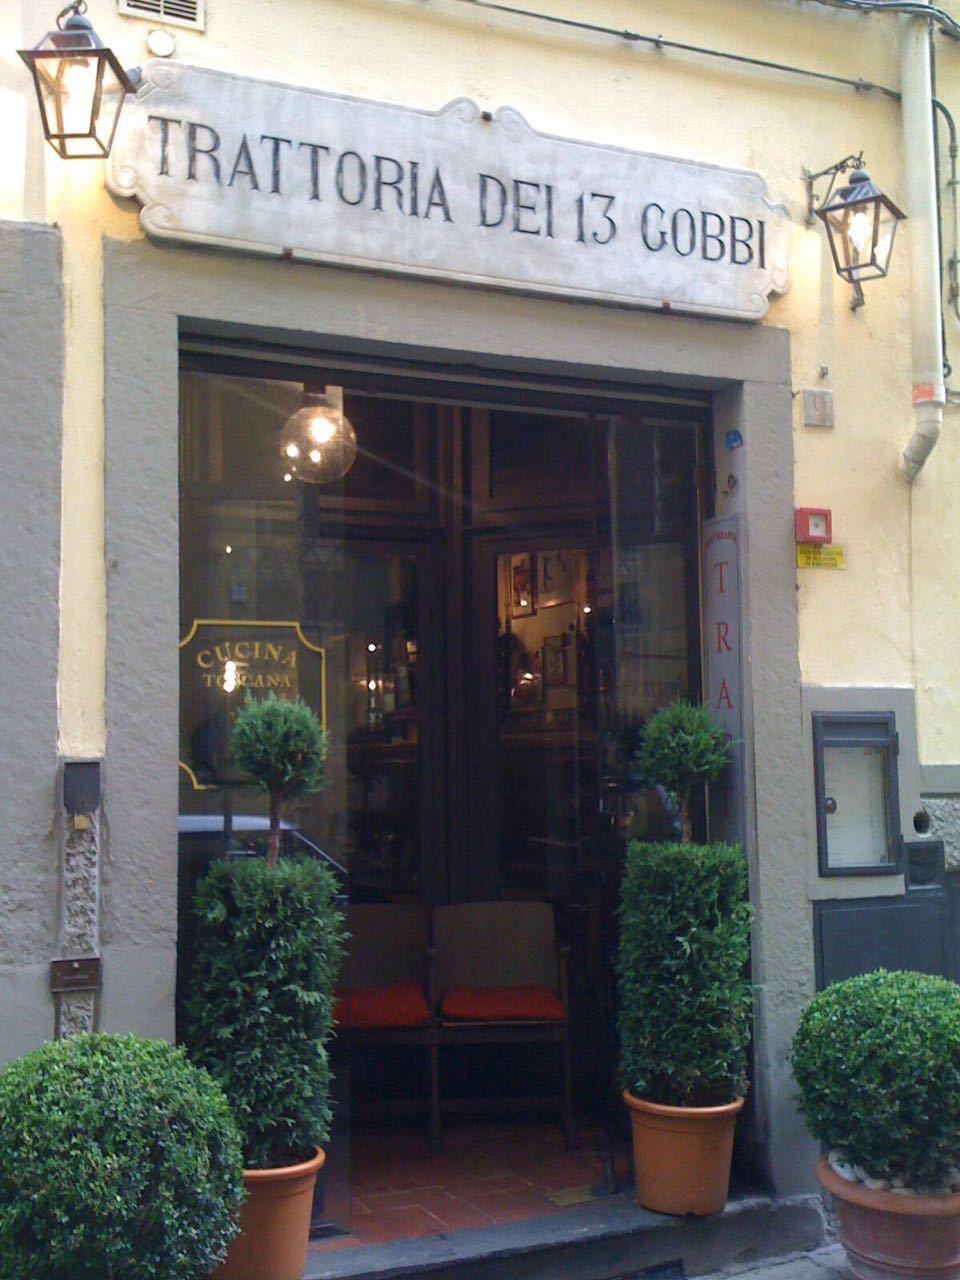 Trattoria 13 Gobbi Reviews Food Drinks In Tuscany Florence Trip Com